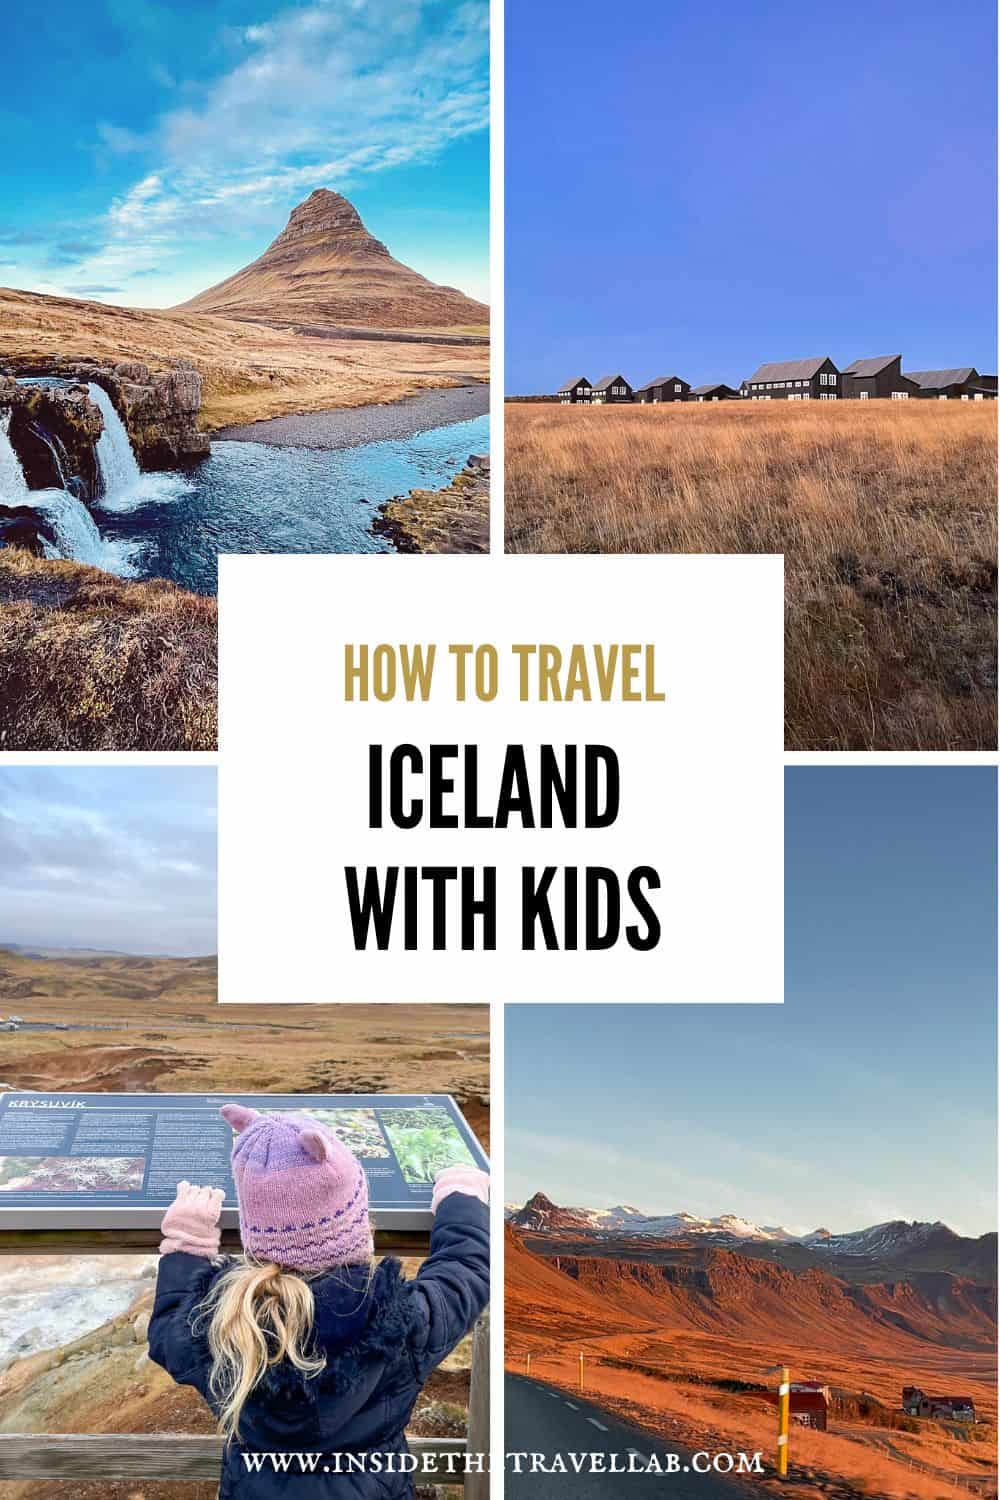 Iceland with Kids Travel Guide cover image for Pinterest